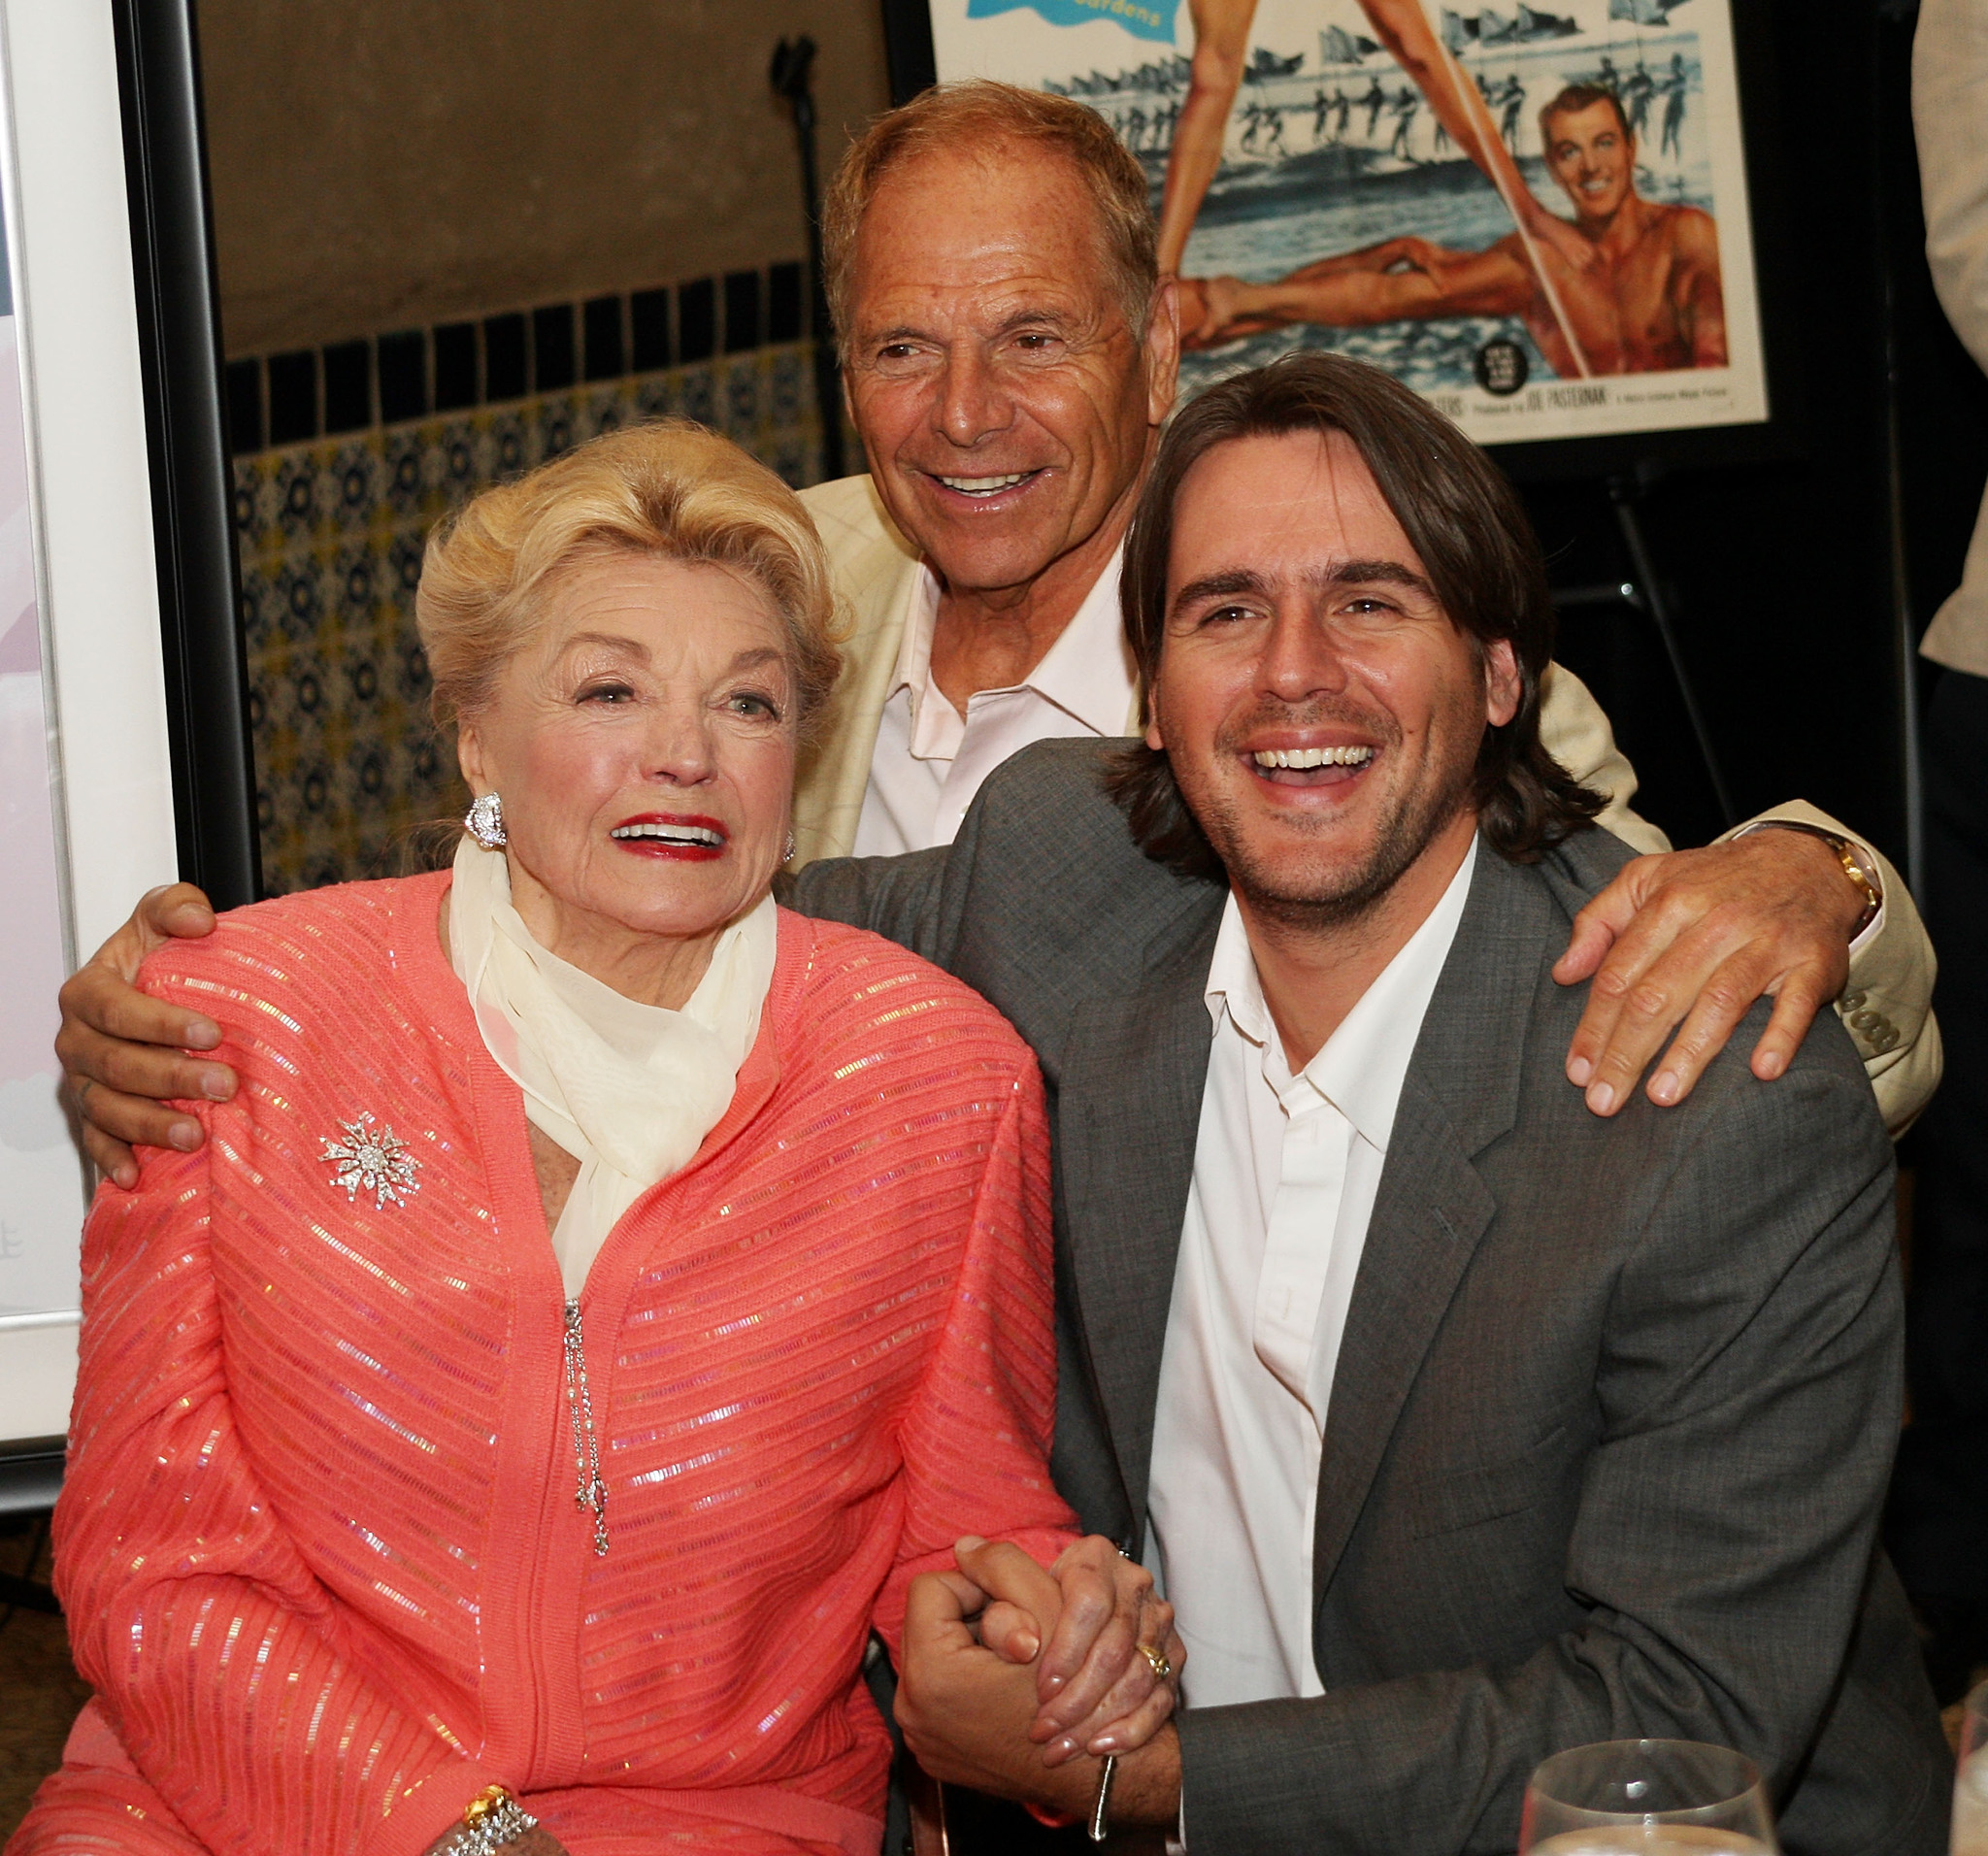 Actress Esther Williams, her huband Edward Bell and her stepson attend the 87th annual installation and awards luncheon for the Hollywood Chamber of Commerce at the Hollywood Roosevelt Hotel on April 9, 2008 in Hollywood, California.